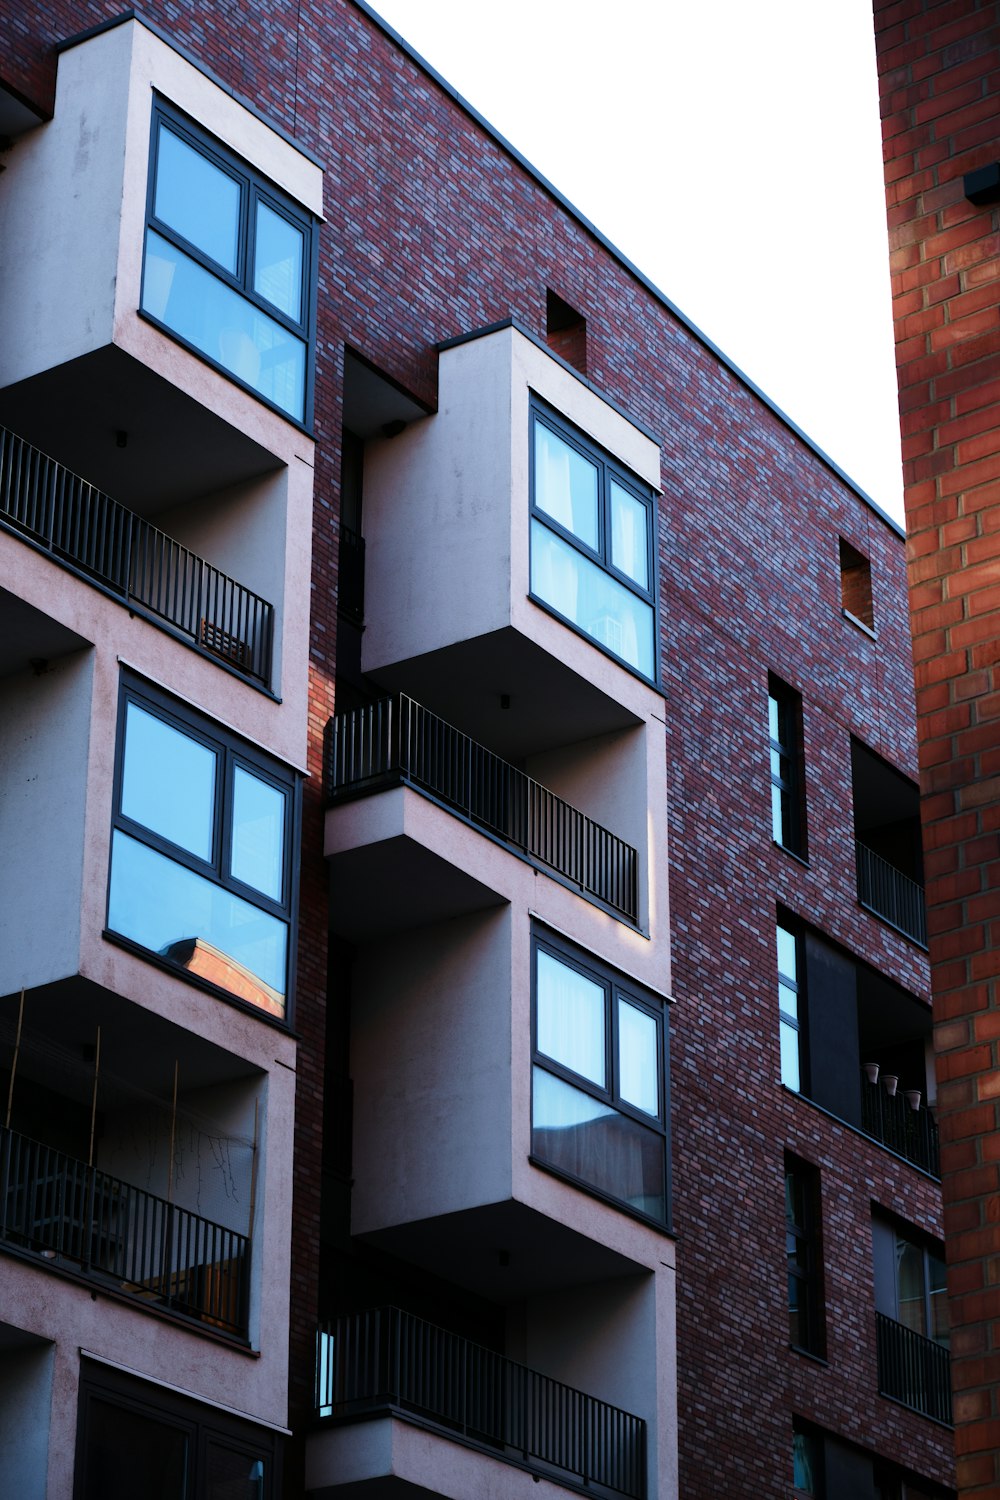 a red brick building with balconies and balconies